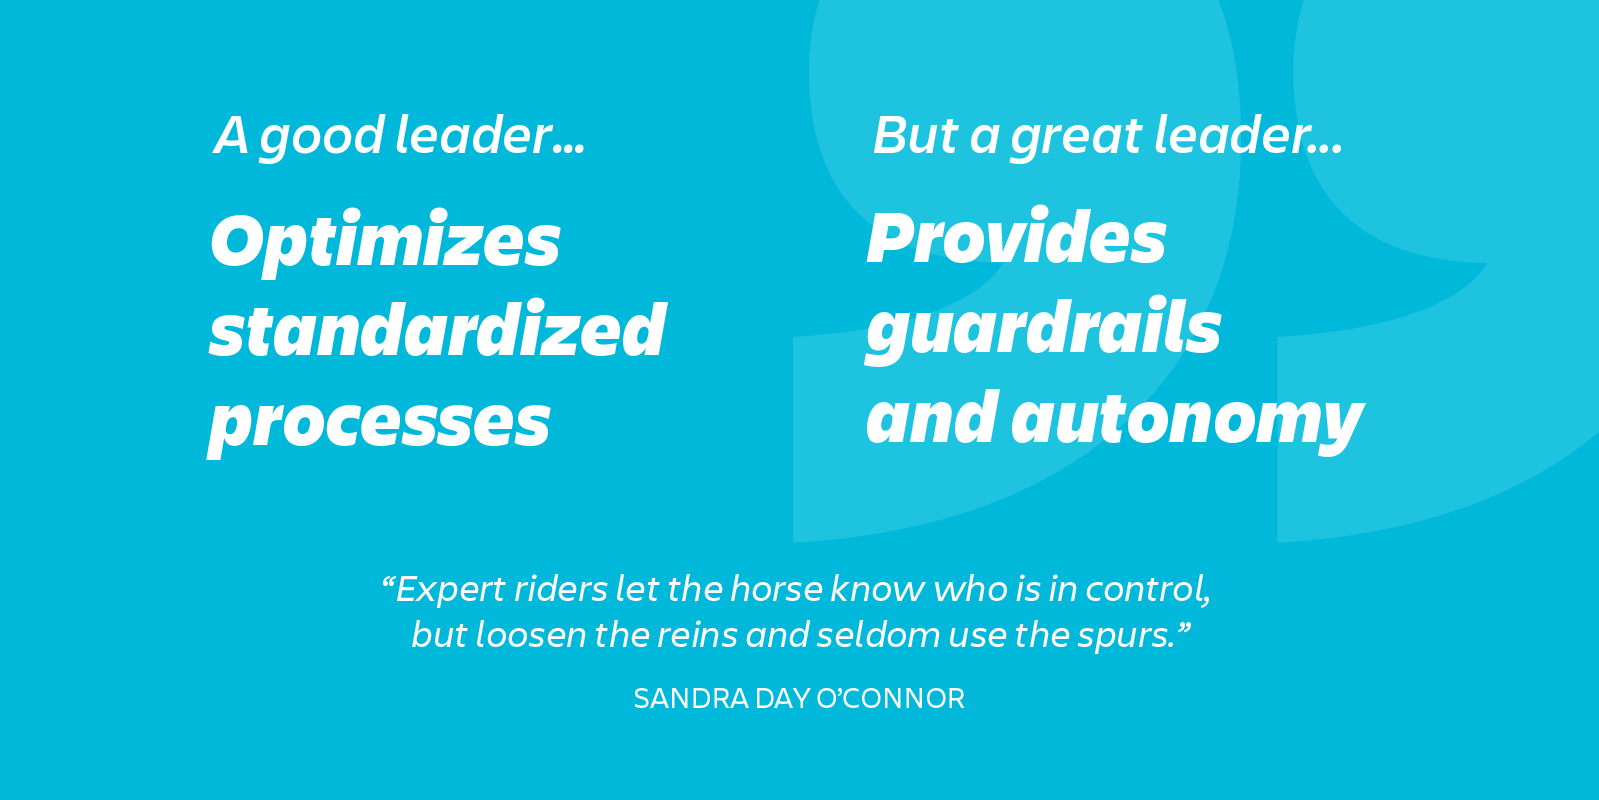 infographic: great leaders provide guardrails and autonomy